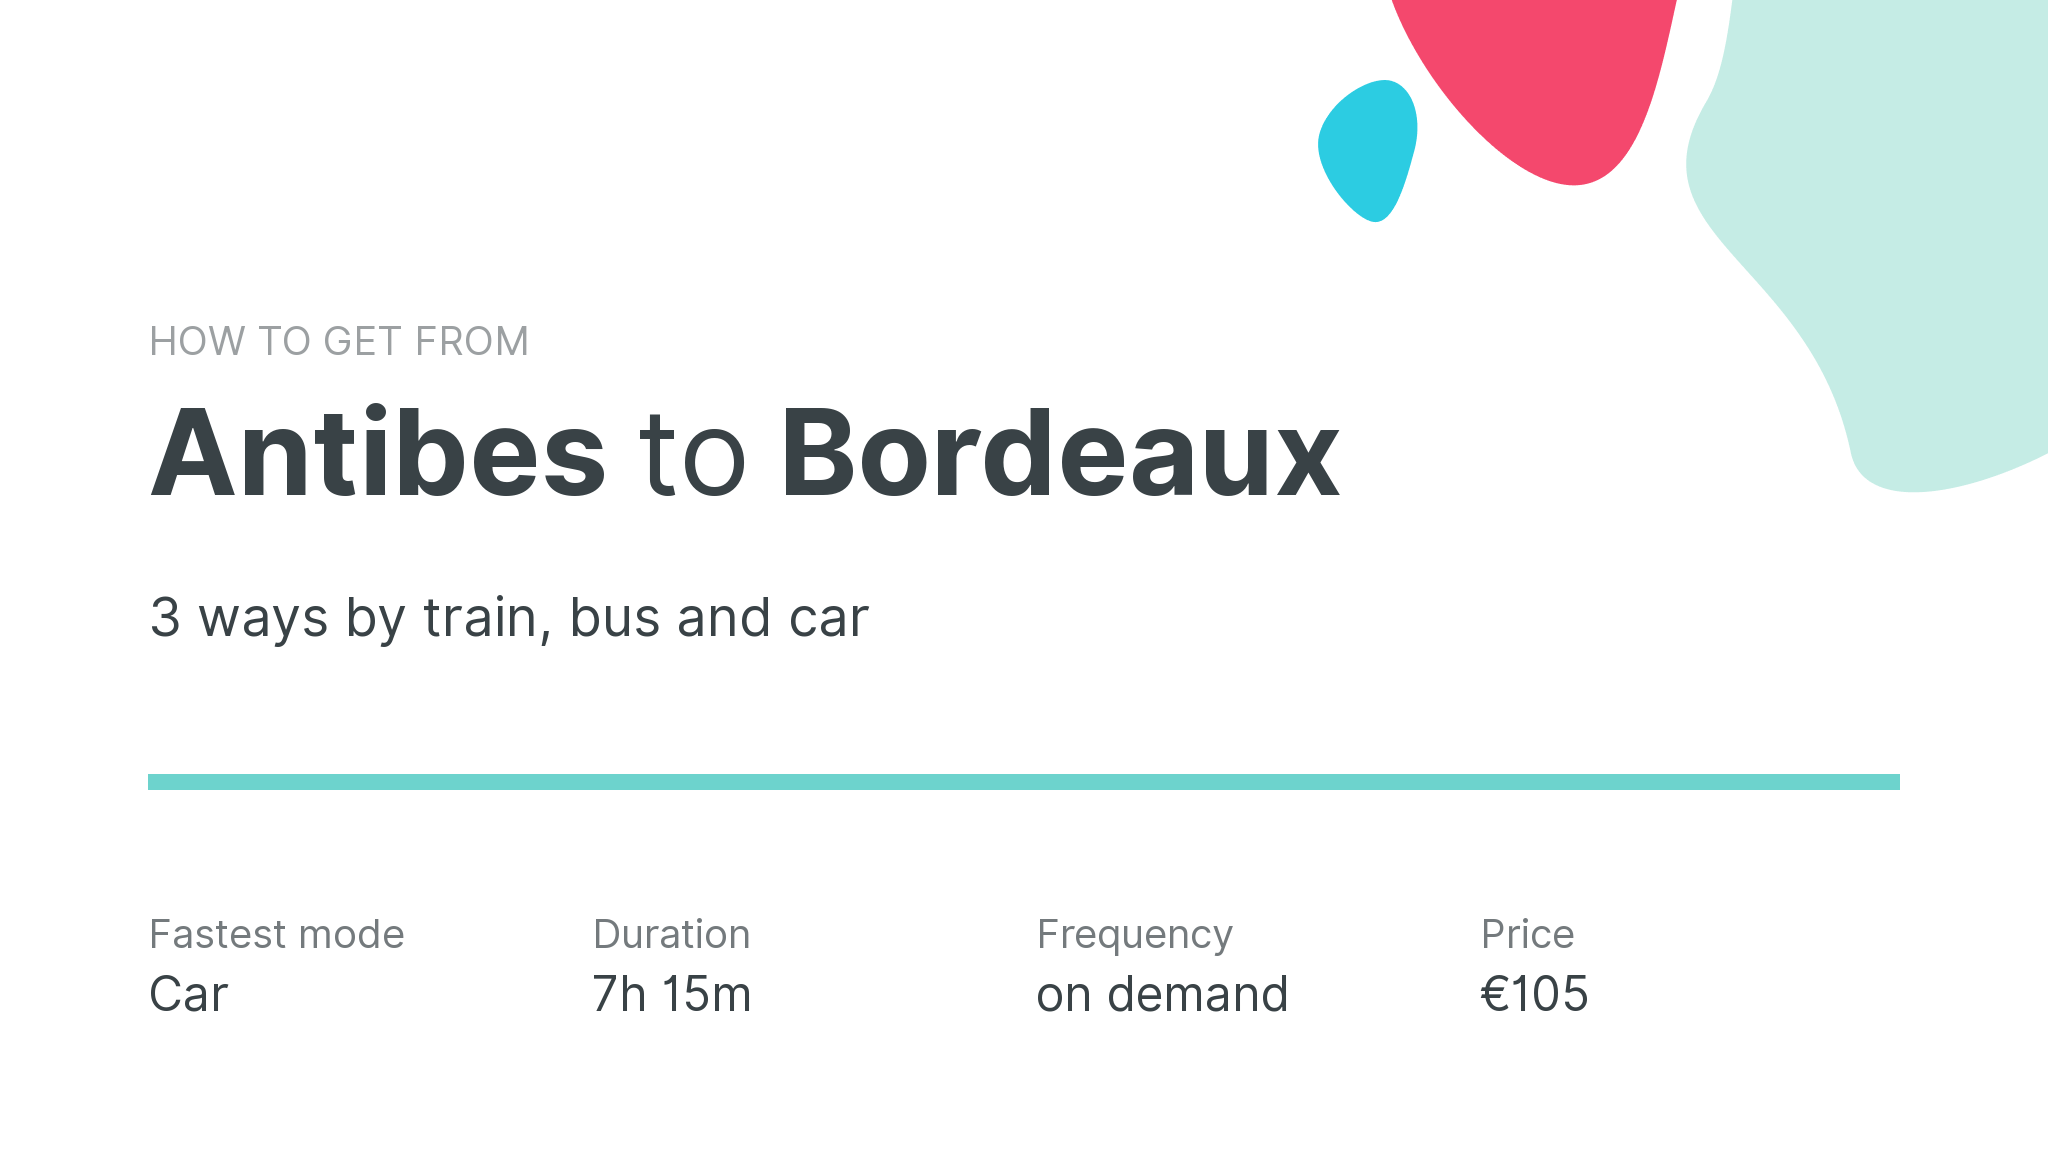 How do I get from Antibes to Bordeaux